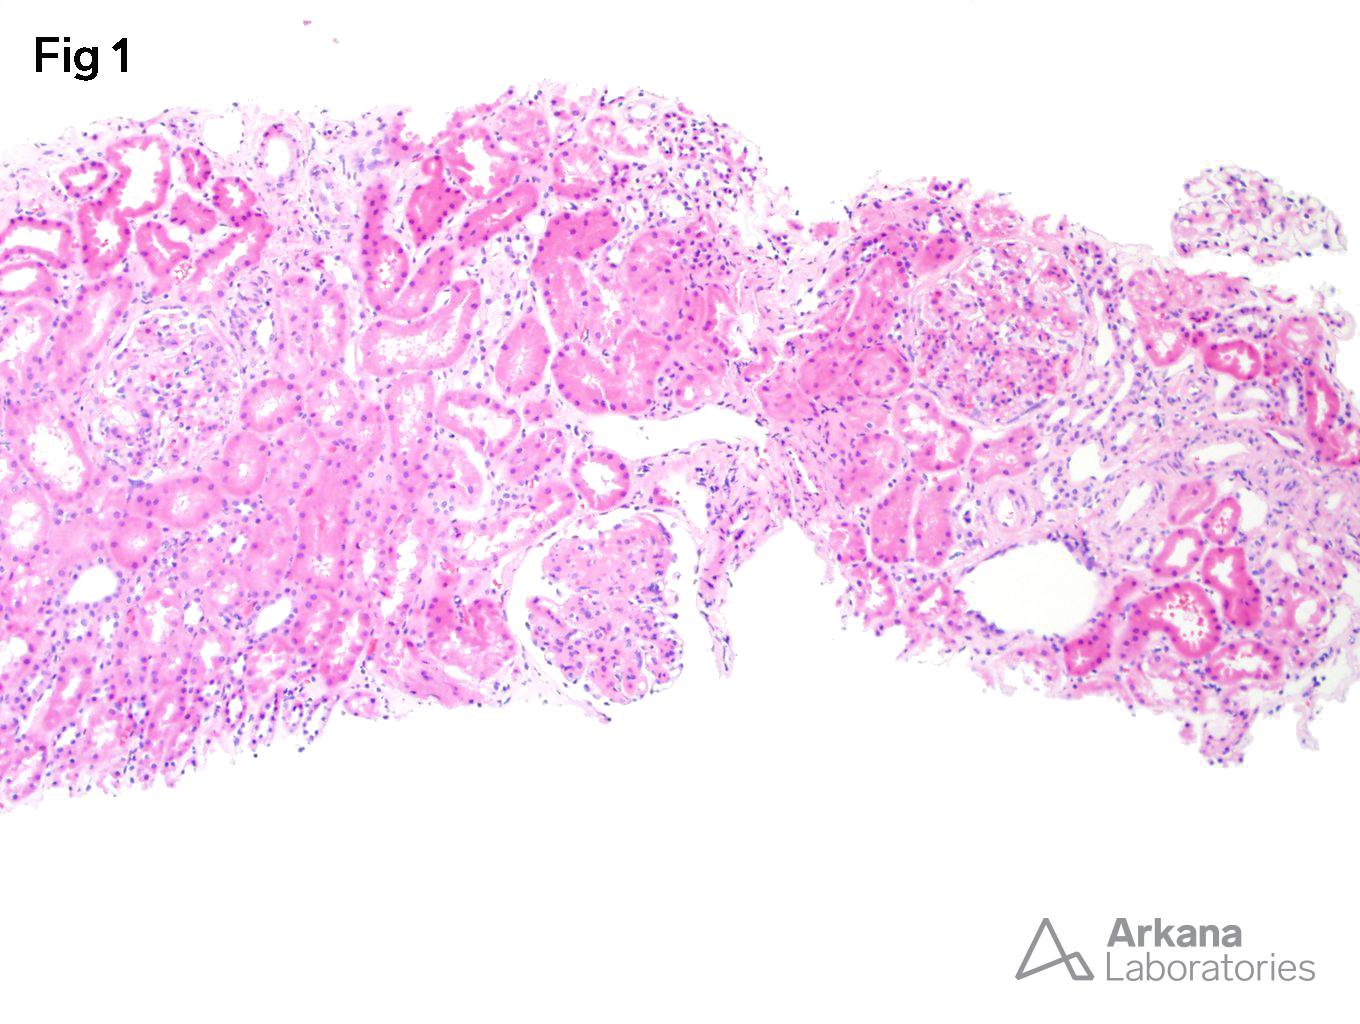 Focal Lupus Nephritis, mesangial hypercellularity